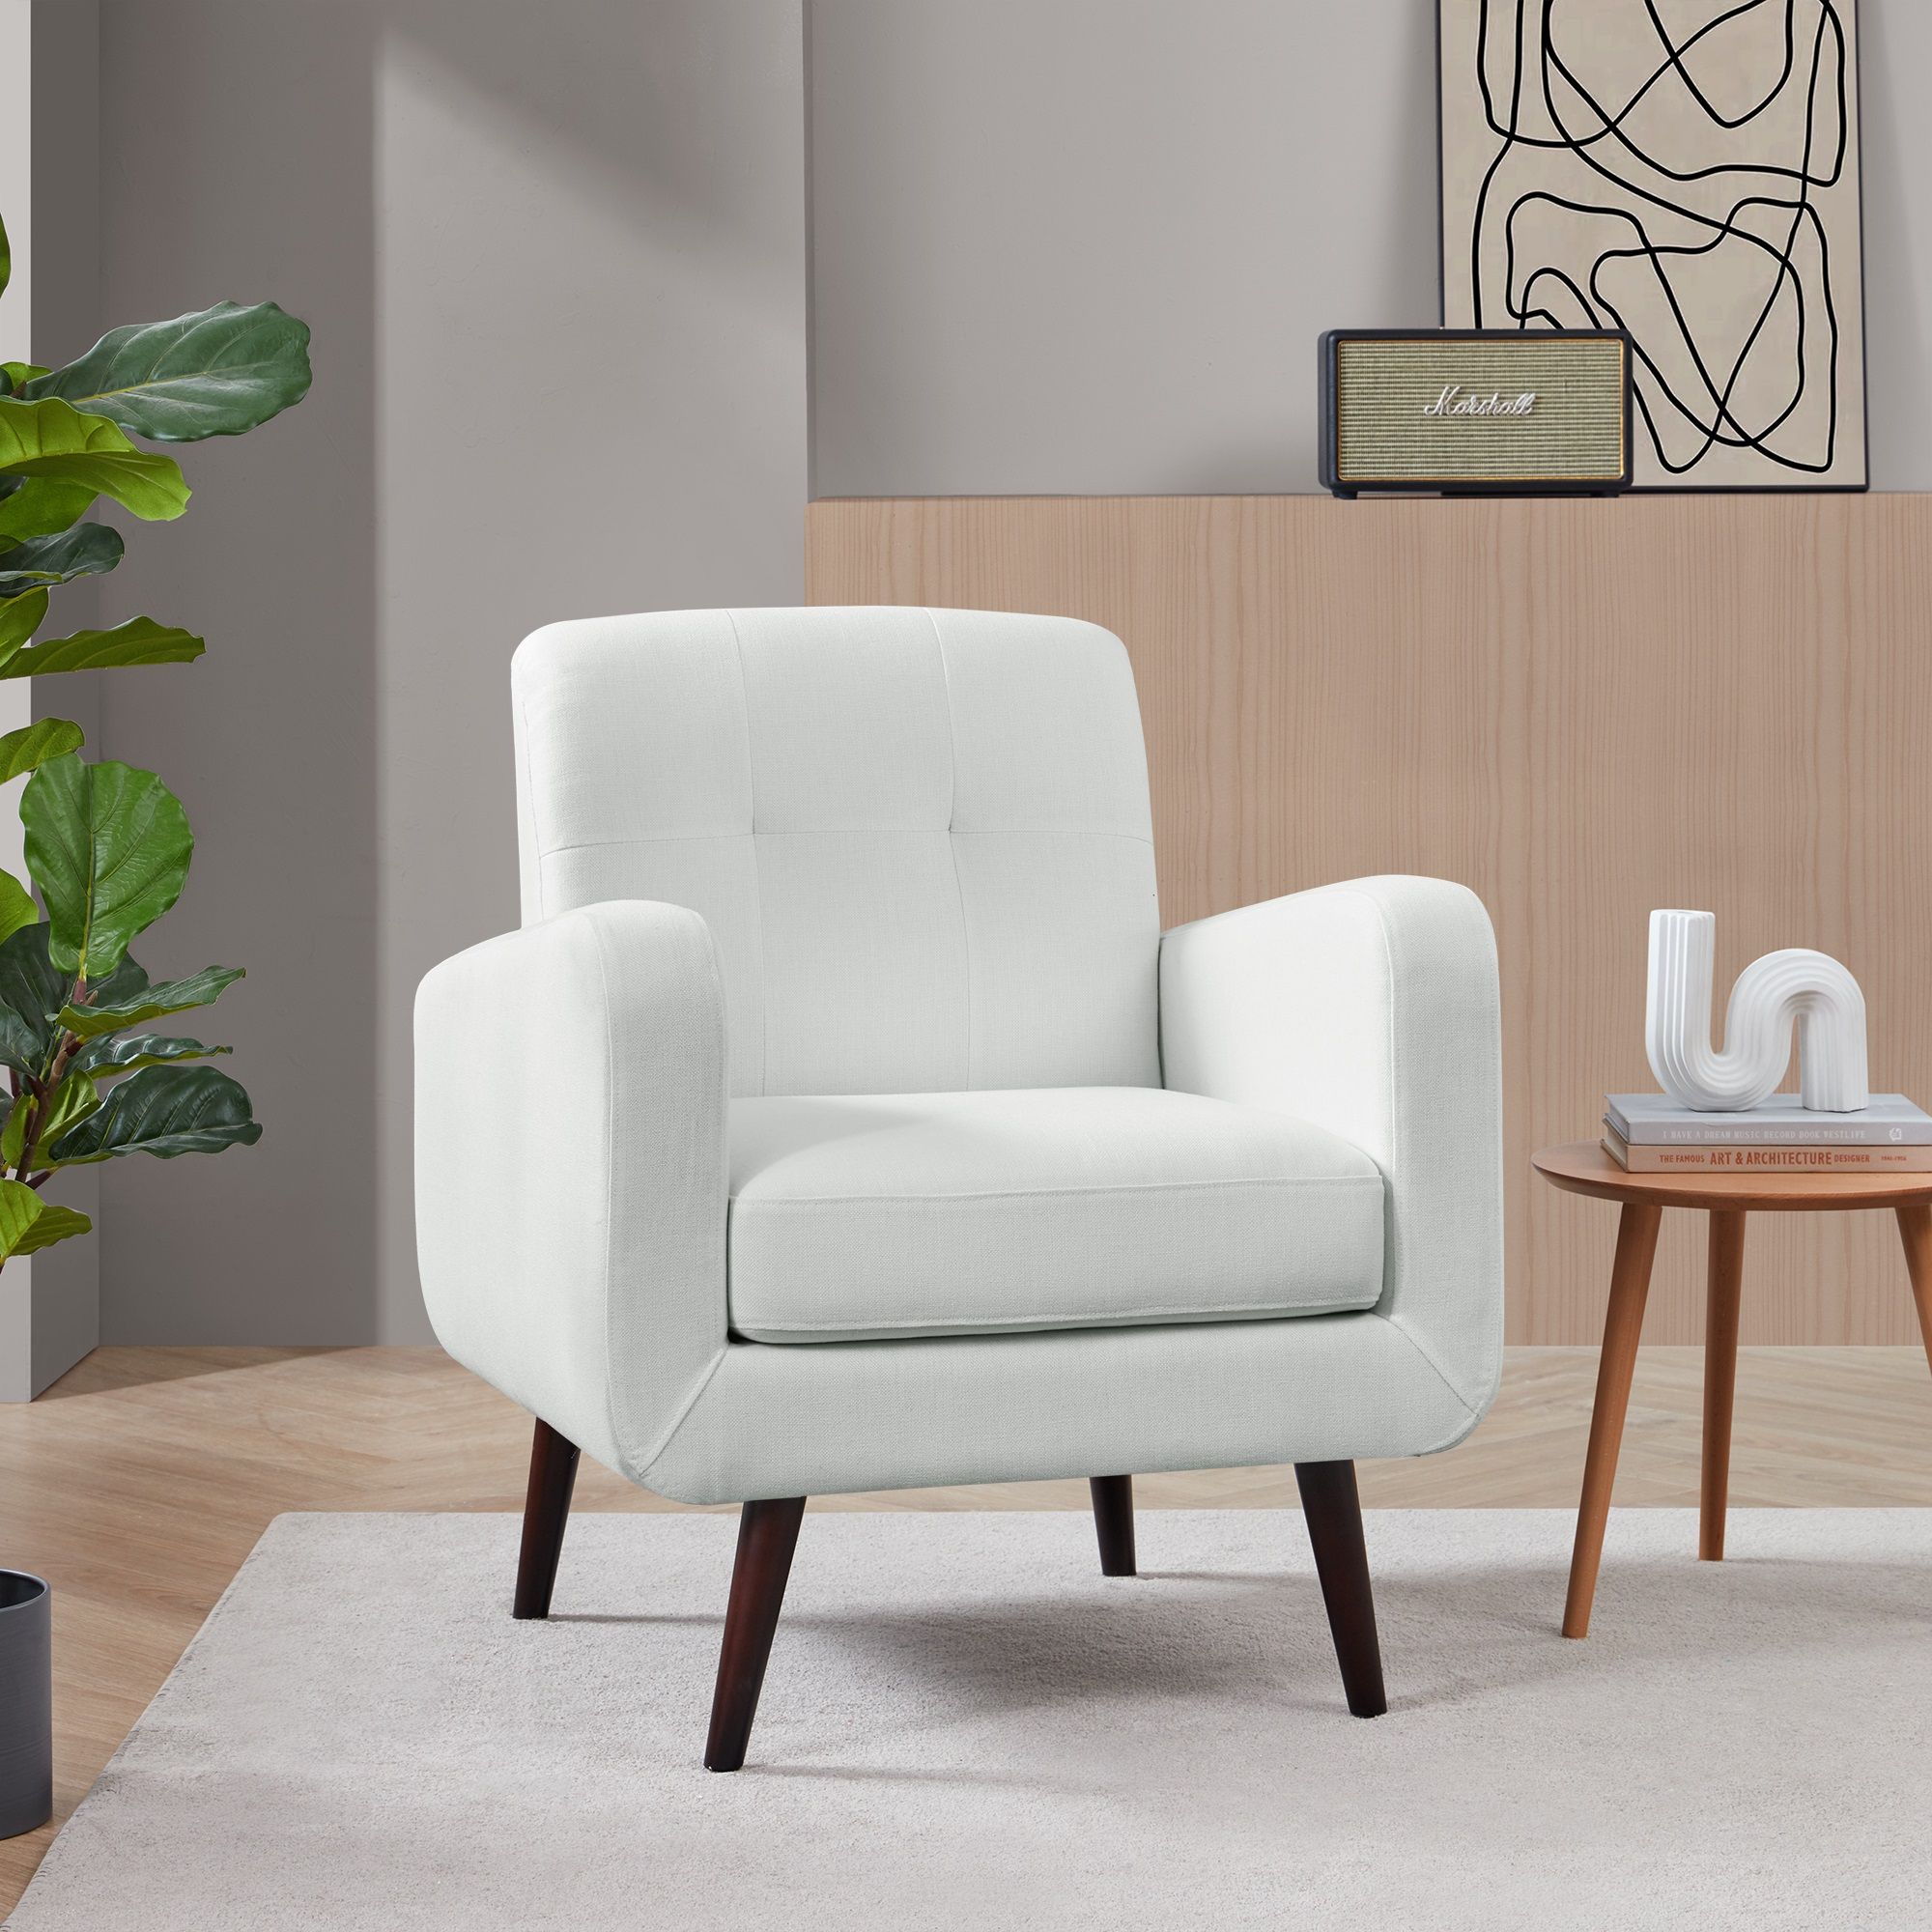 Belleze Hasting Arm Chair Comfy Fabric Upholstered Tufted Accent Chair With Regard To White Textured Round Accent Stools (View 3 of 20)